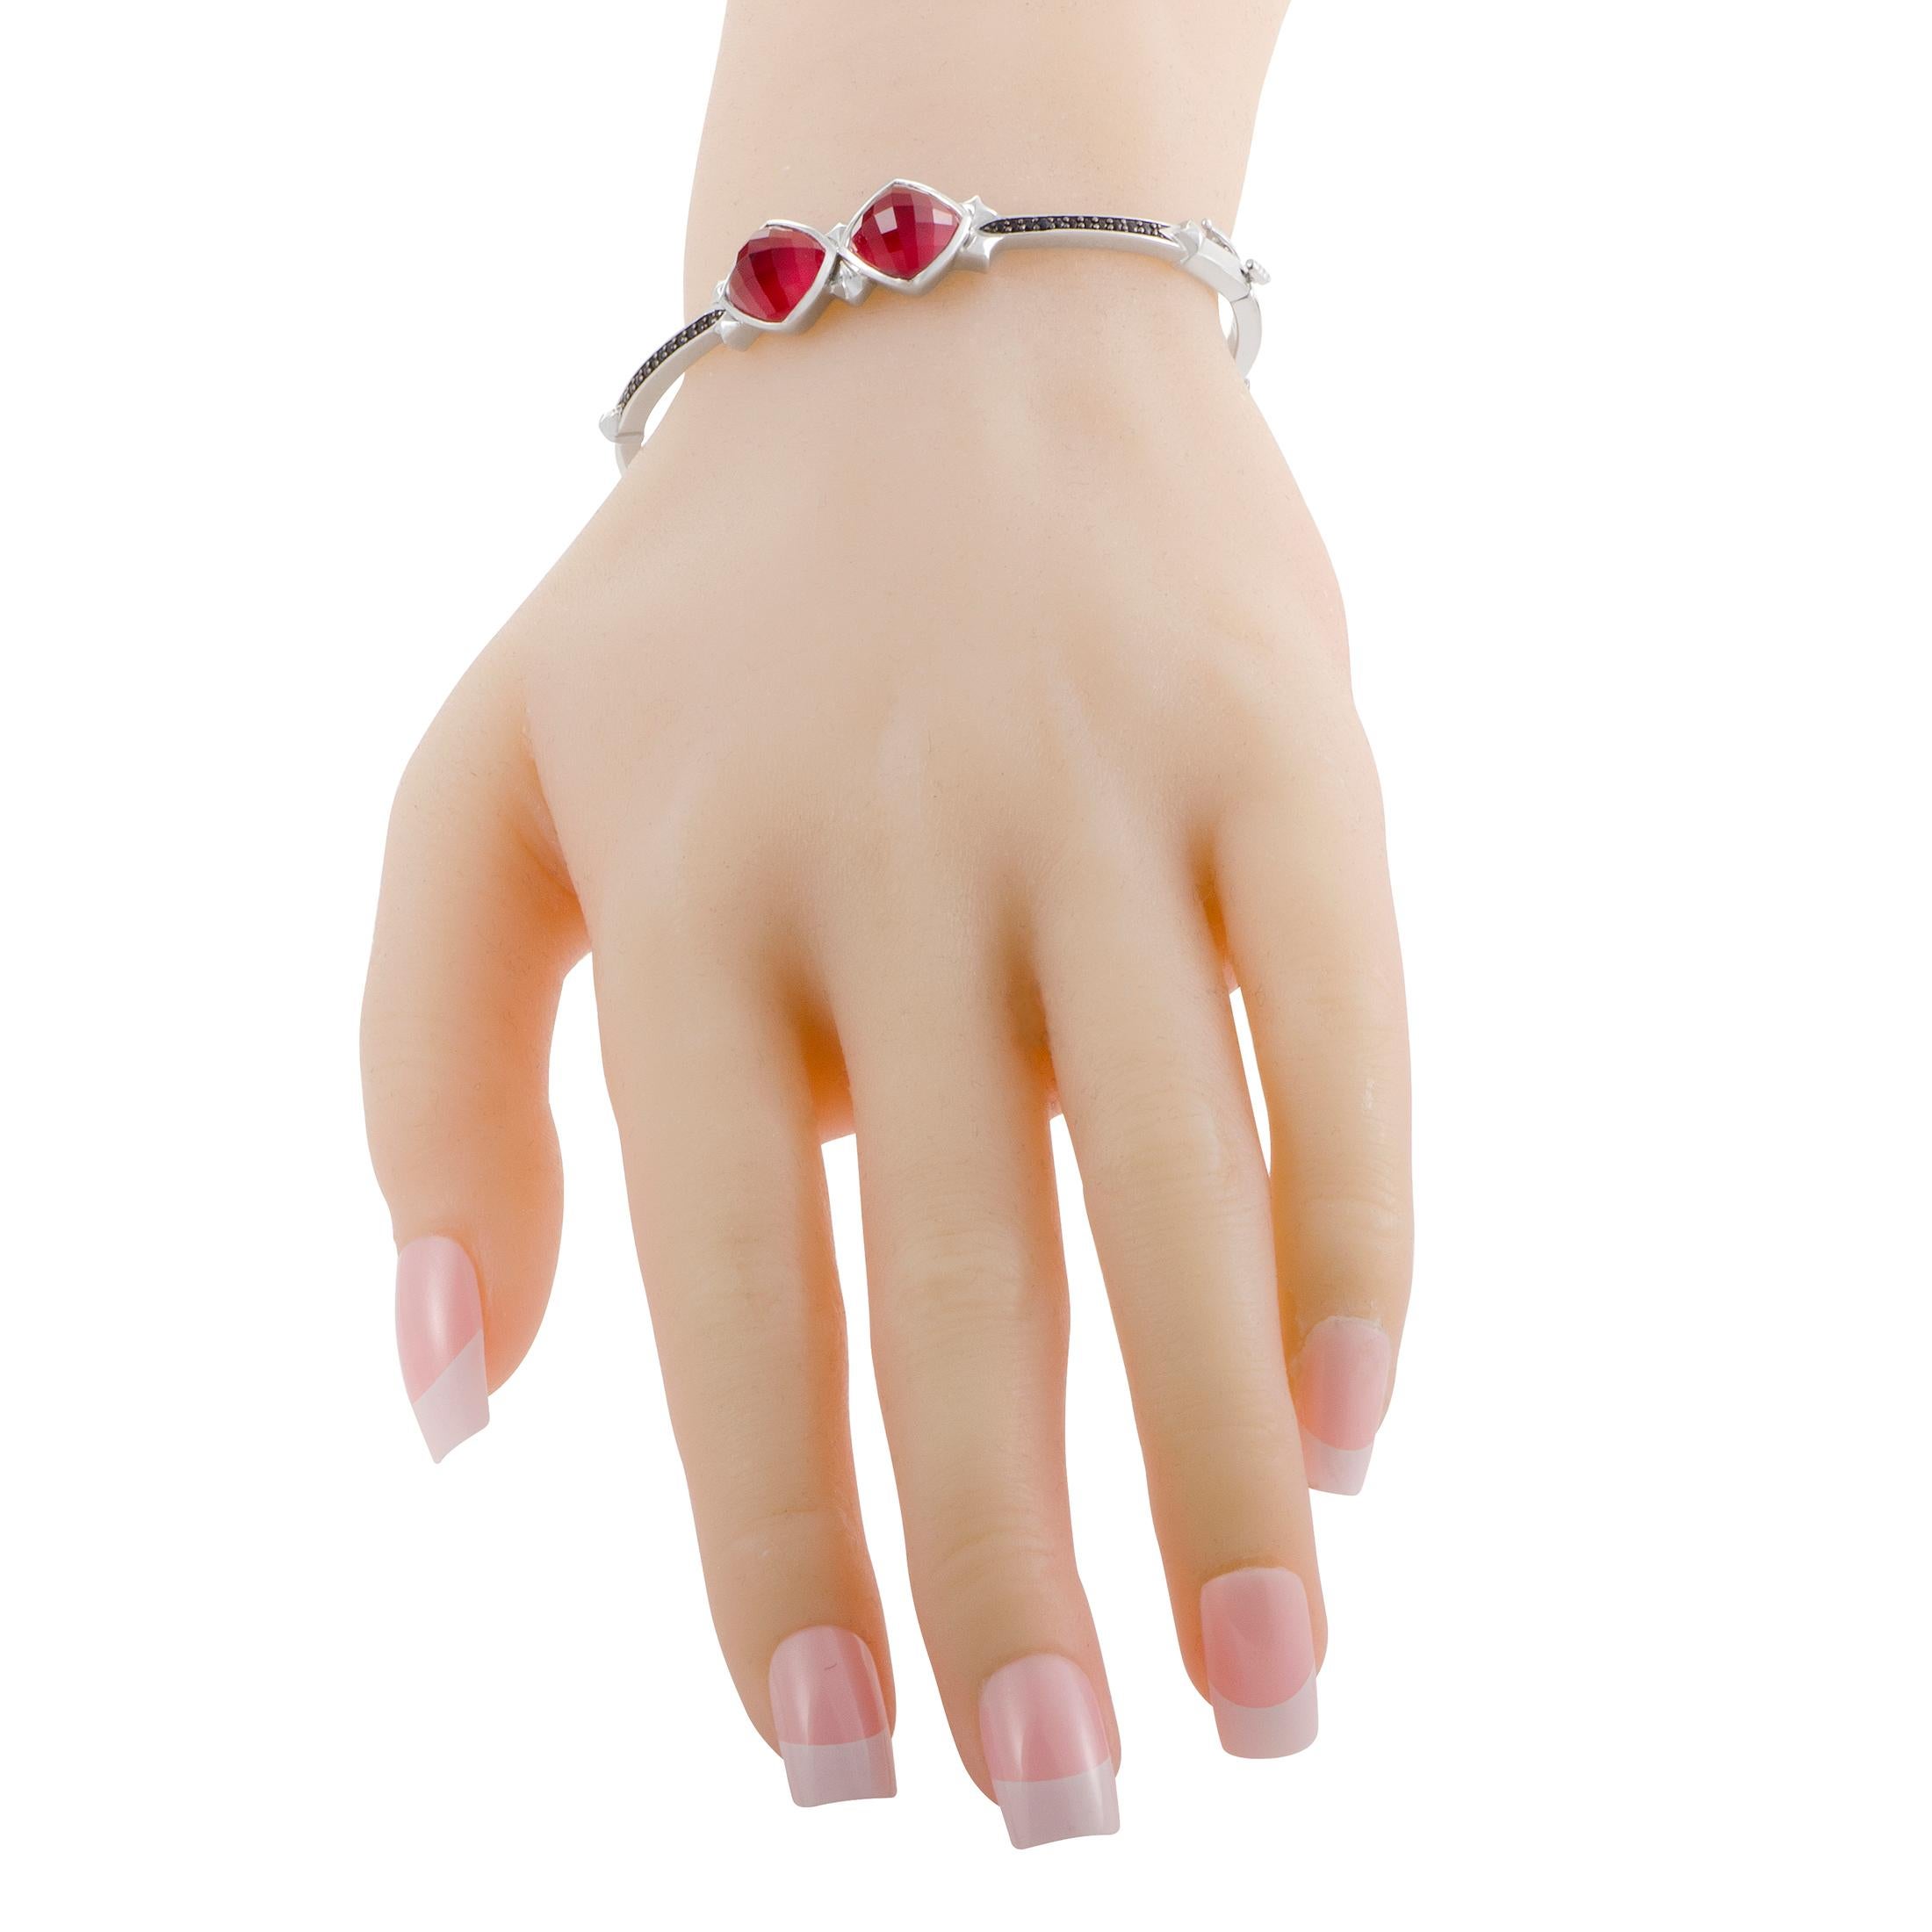 The tasteful blend of compelling gems includes fabulous synthesized coral stones, splendid quartz and stunning black sapphires amounting to 0.23ct in this fantastic bangle from Stephen Webster's Superstud collection which is made of white